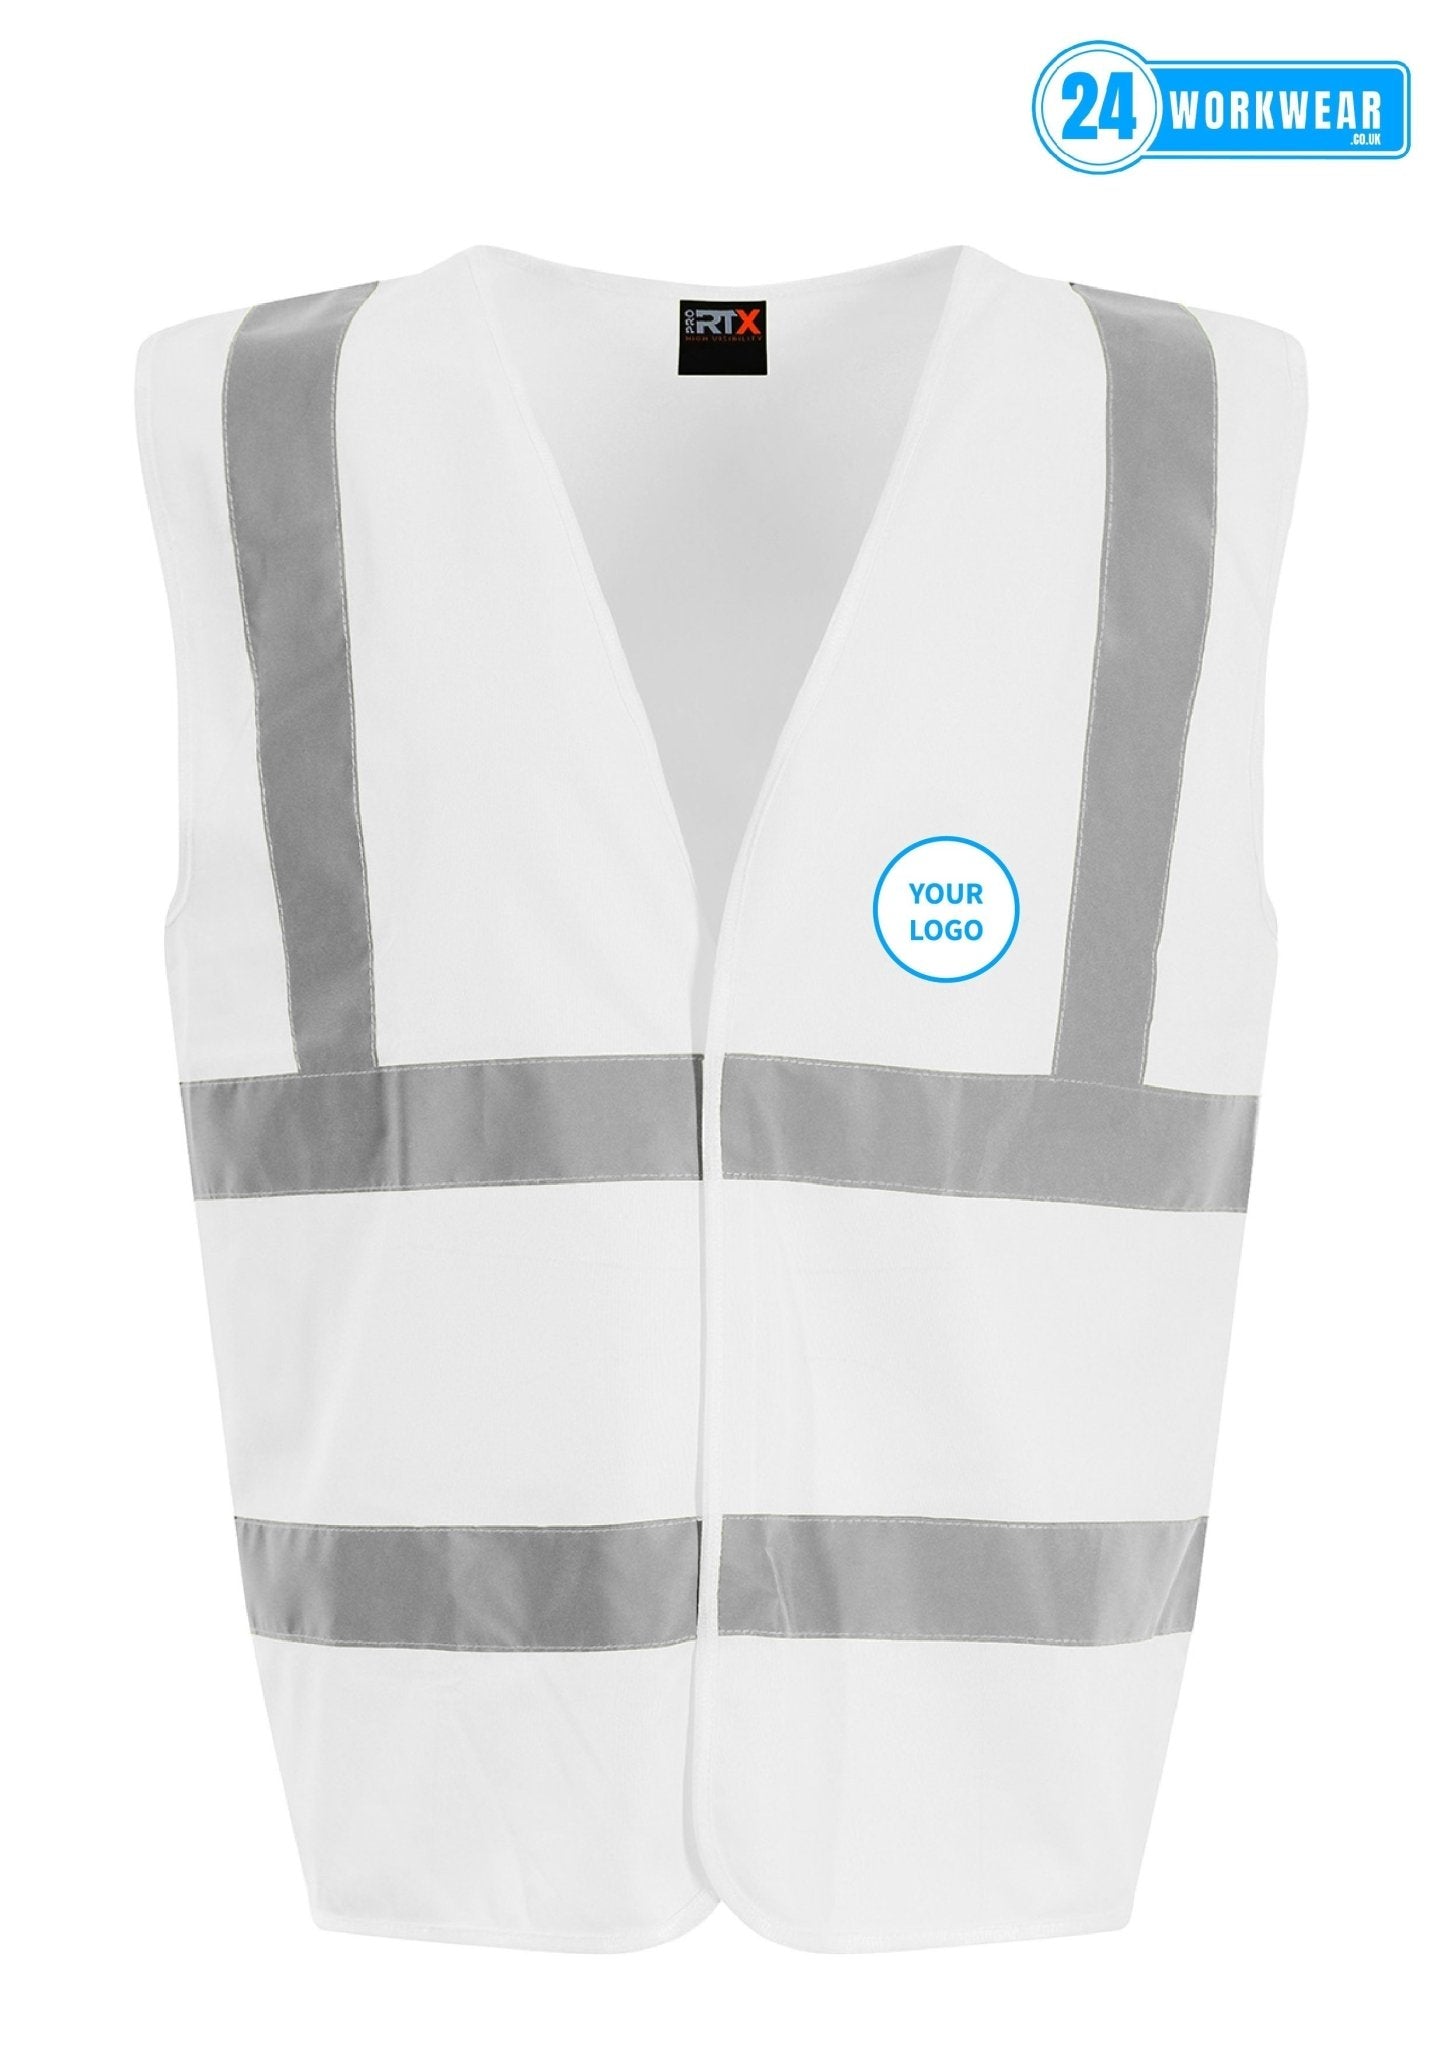 50 x High Visibility Waistcoat Deal - 24 Workwear - High Visibility